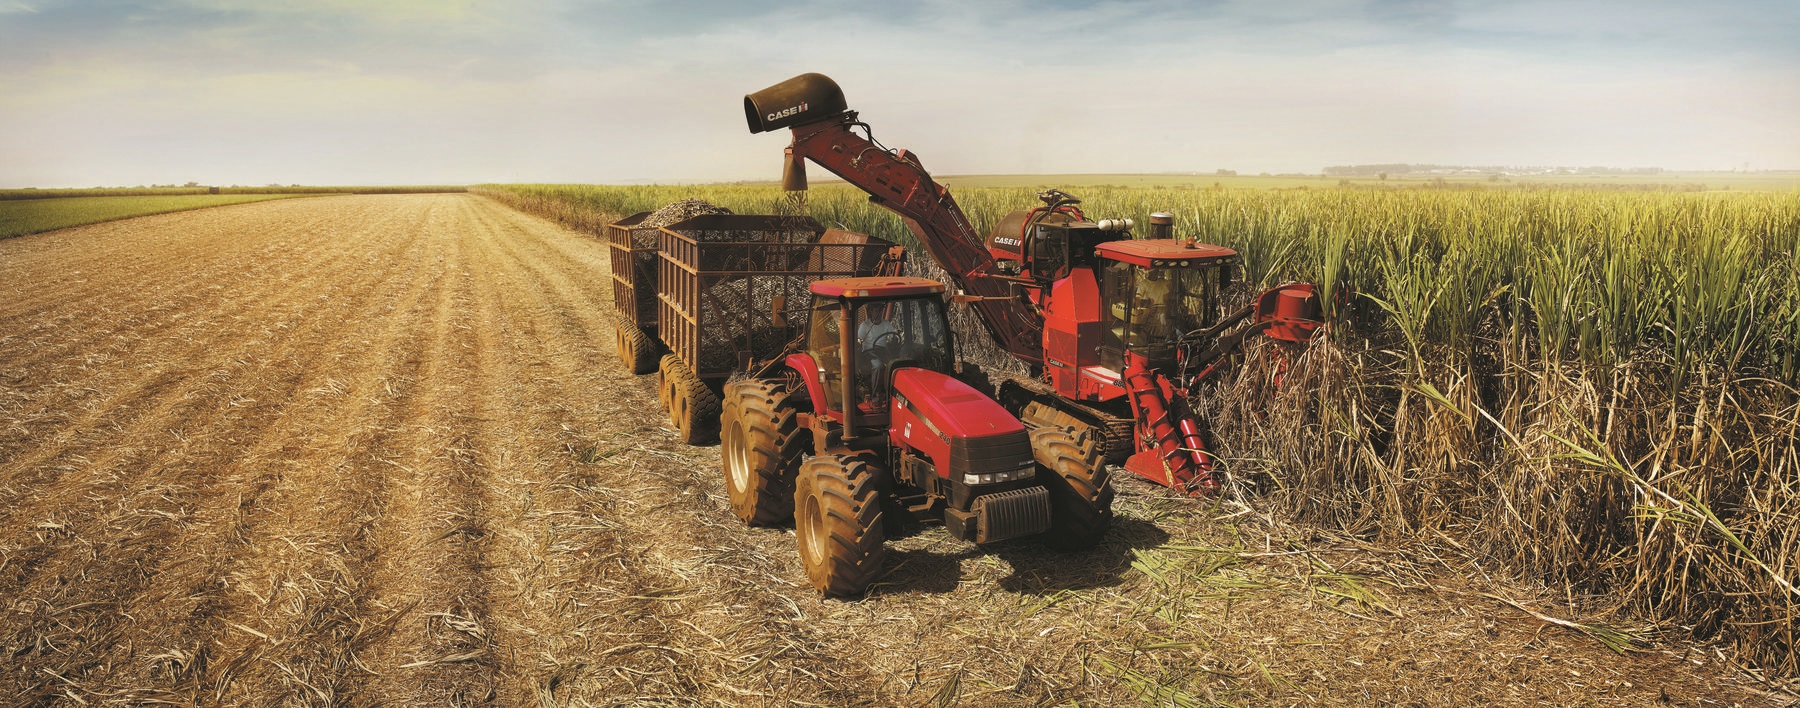 SUPPORTING AGRICULTURAL GROWTH IN AFRICA AND THE MIDDLE EAST WITH CASE IHS RED POWER